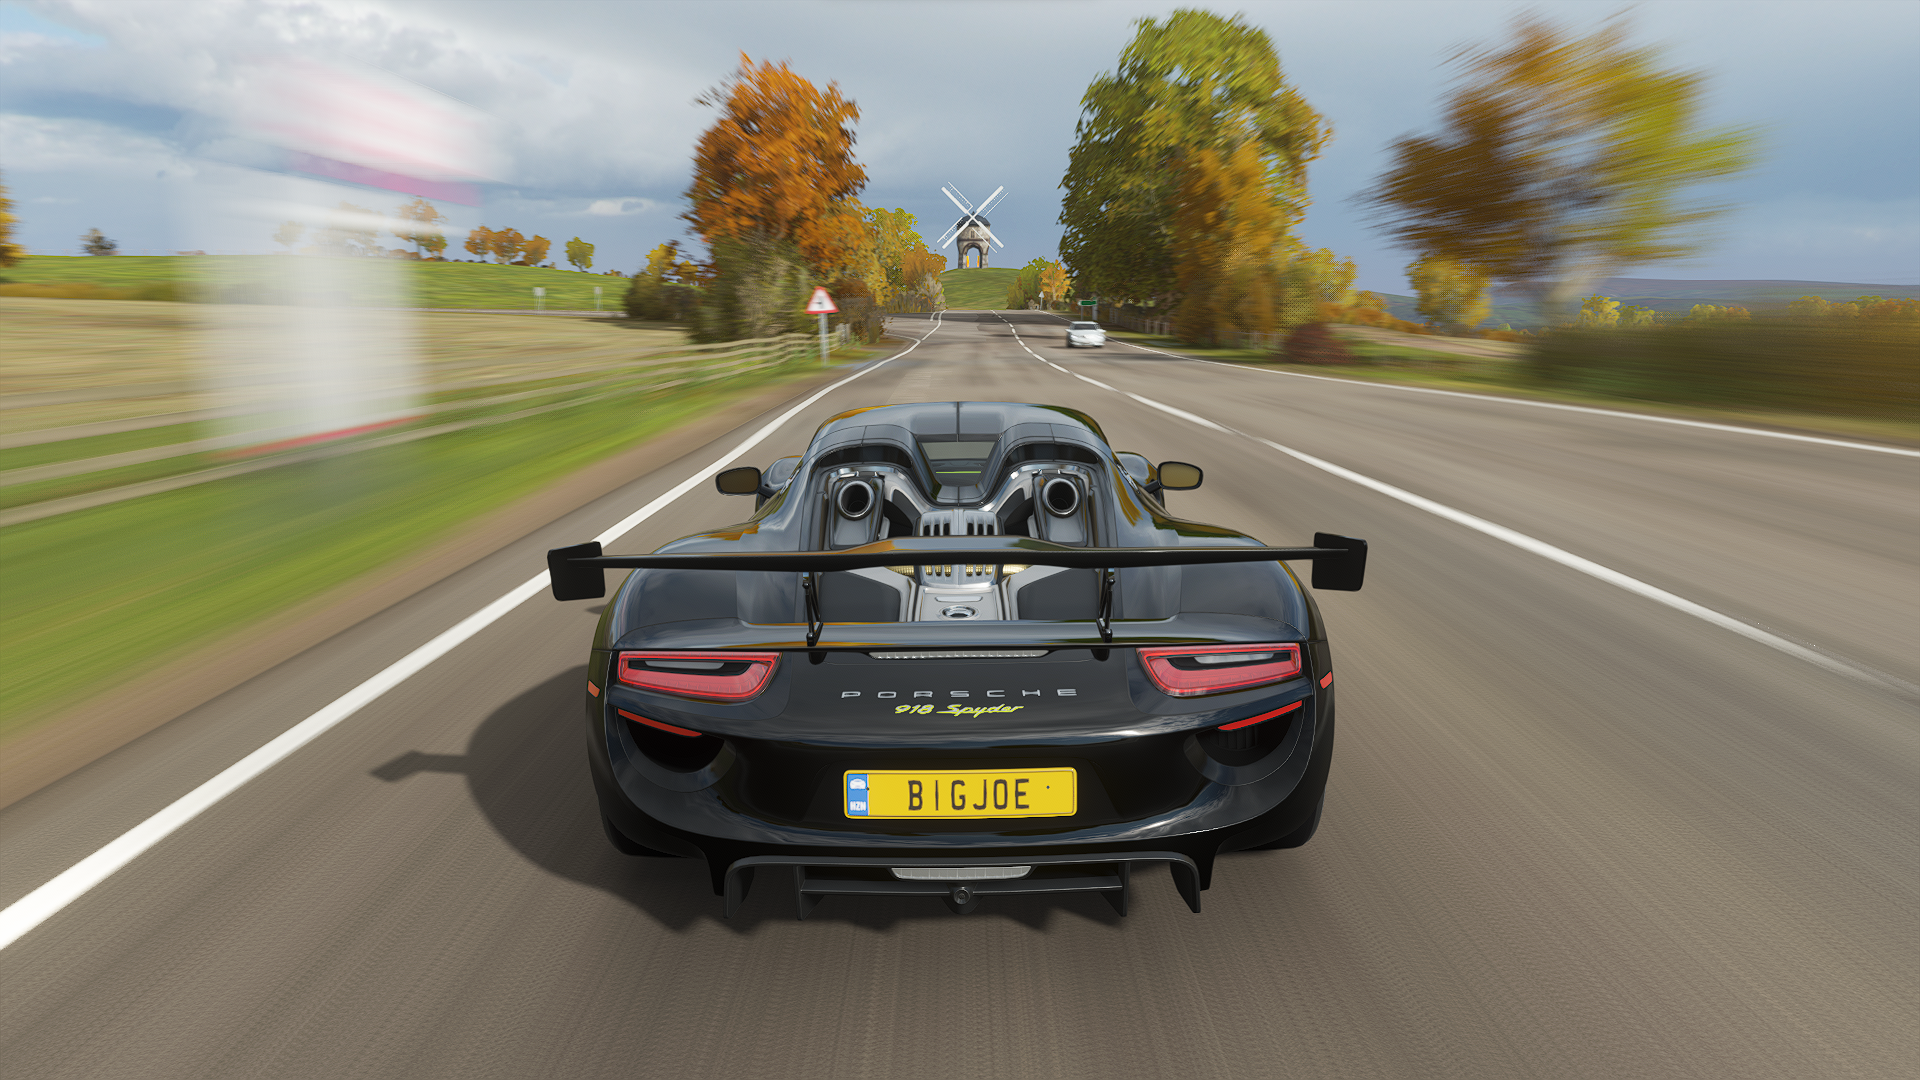 General 1920x1080 Forza Forza Horizon Forza Horizon 4 car racing Porsche 918 Spyder video games screen shot CGI rear view licence plates road blurred blurry background trees sky clouds